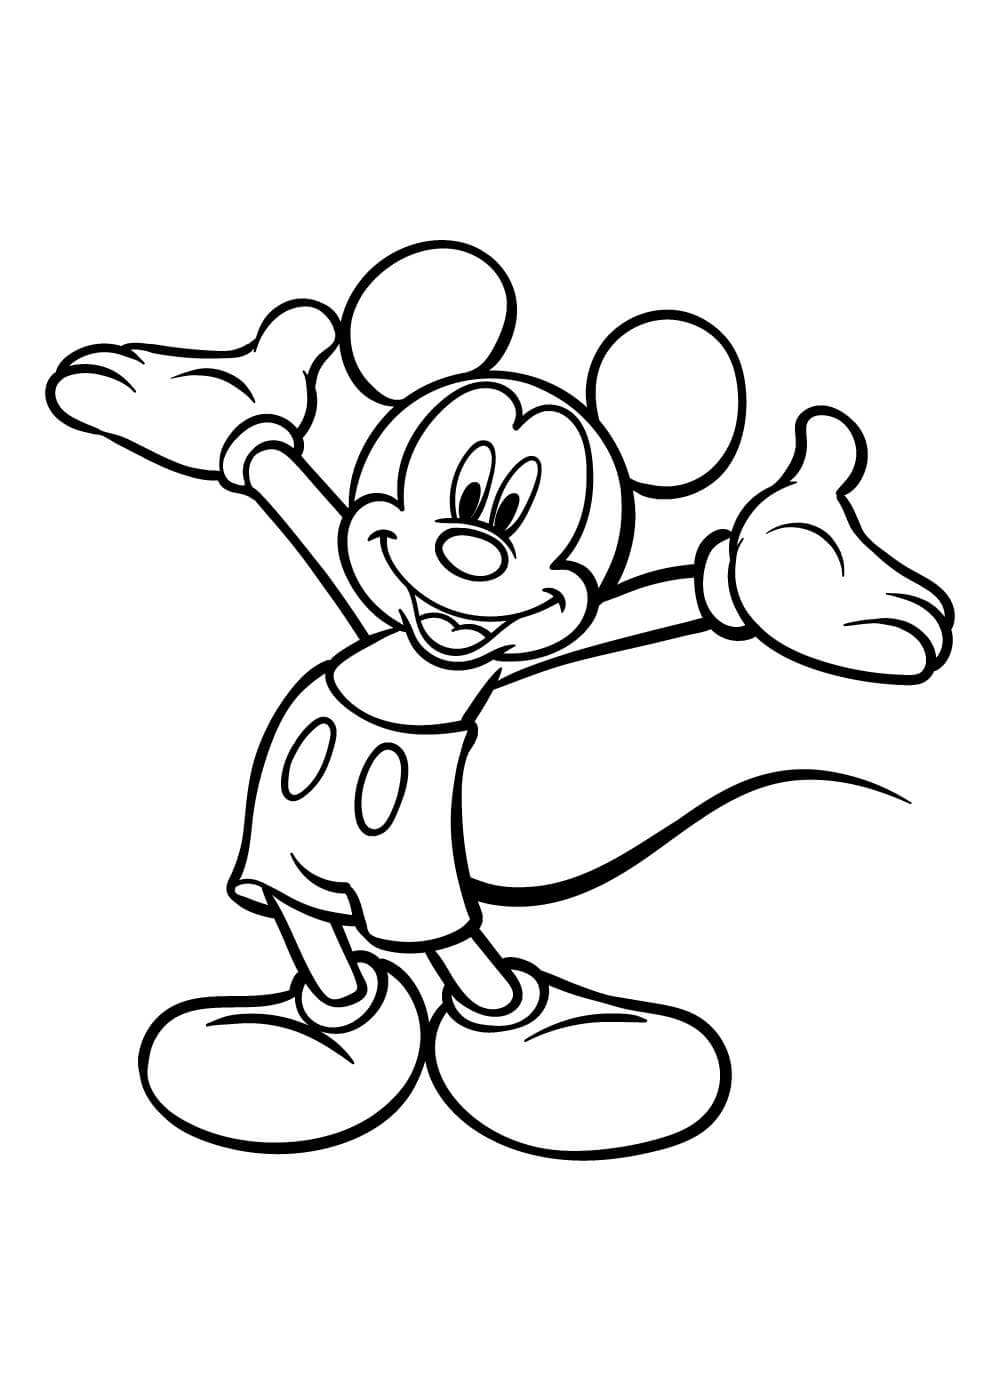 fun-mickey-mouse-coloring-page-download-print-or-color-online-for-free